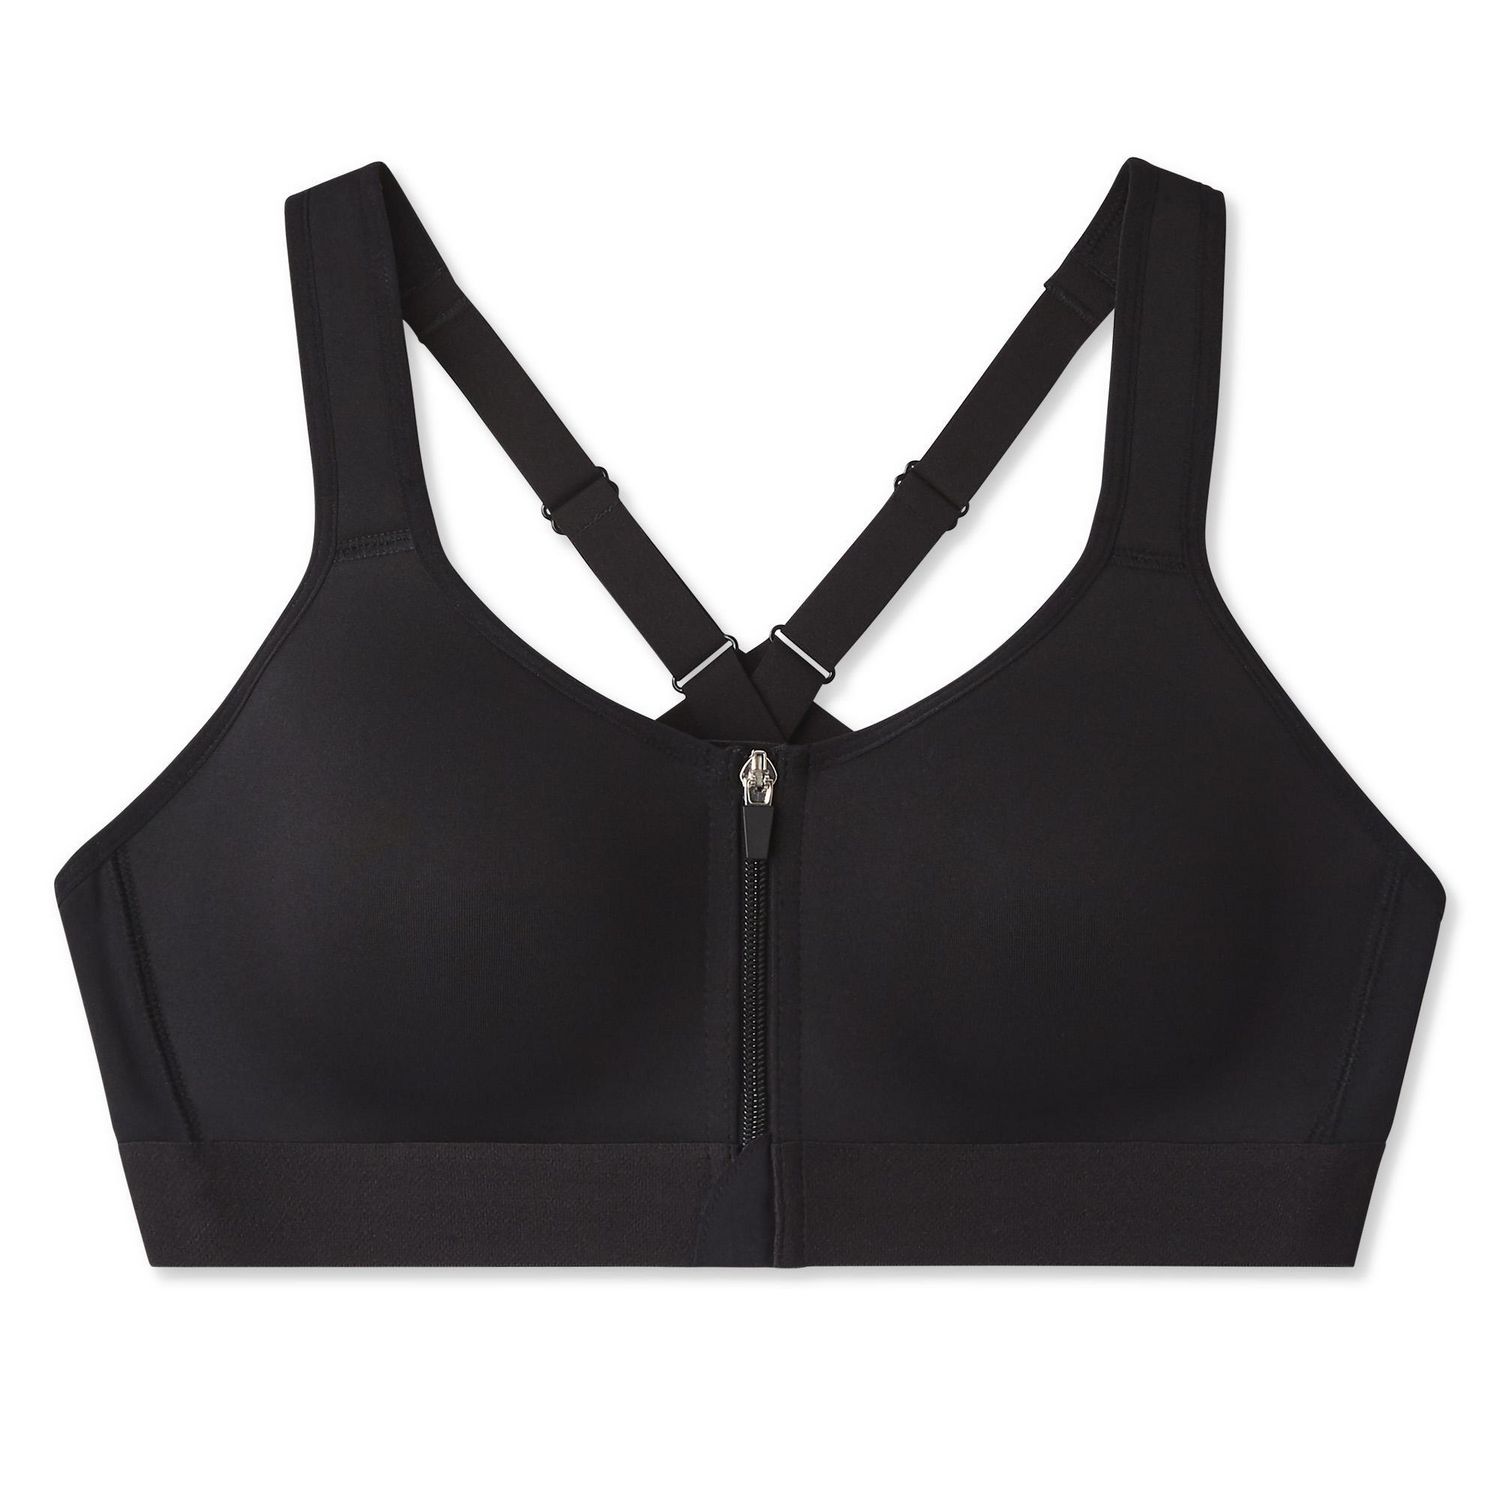 Women's Zip-Up Front Sports Bras w/ Racer Back - Heathered Print